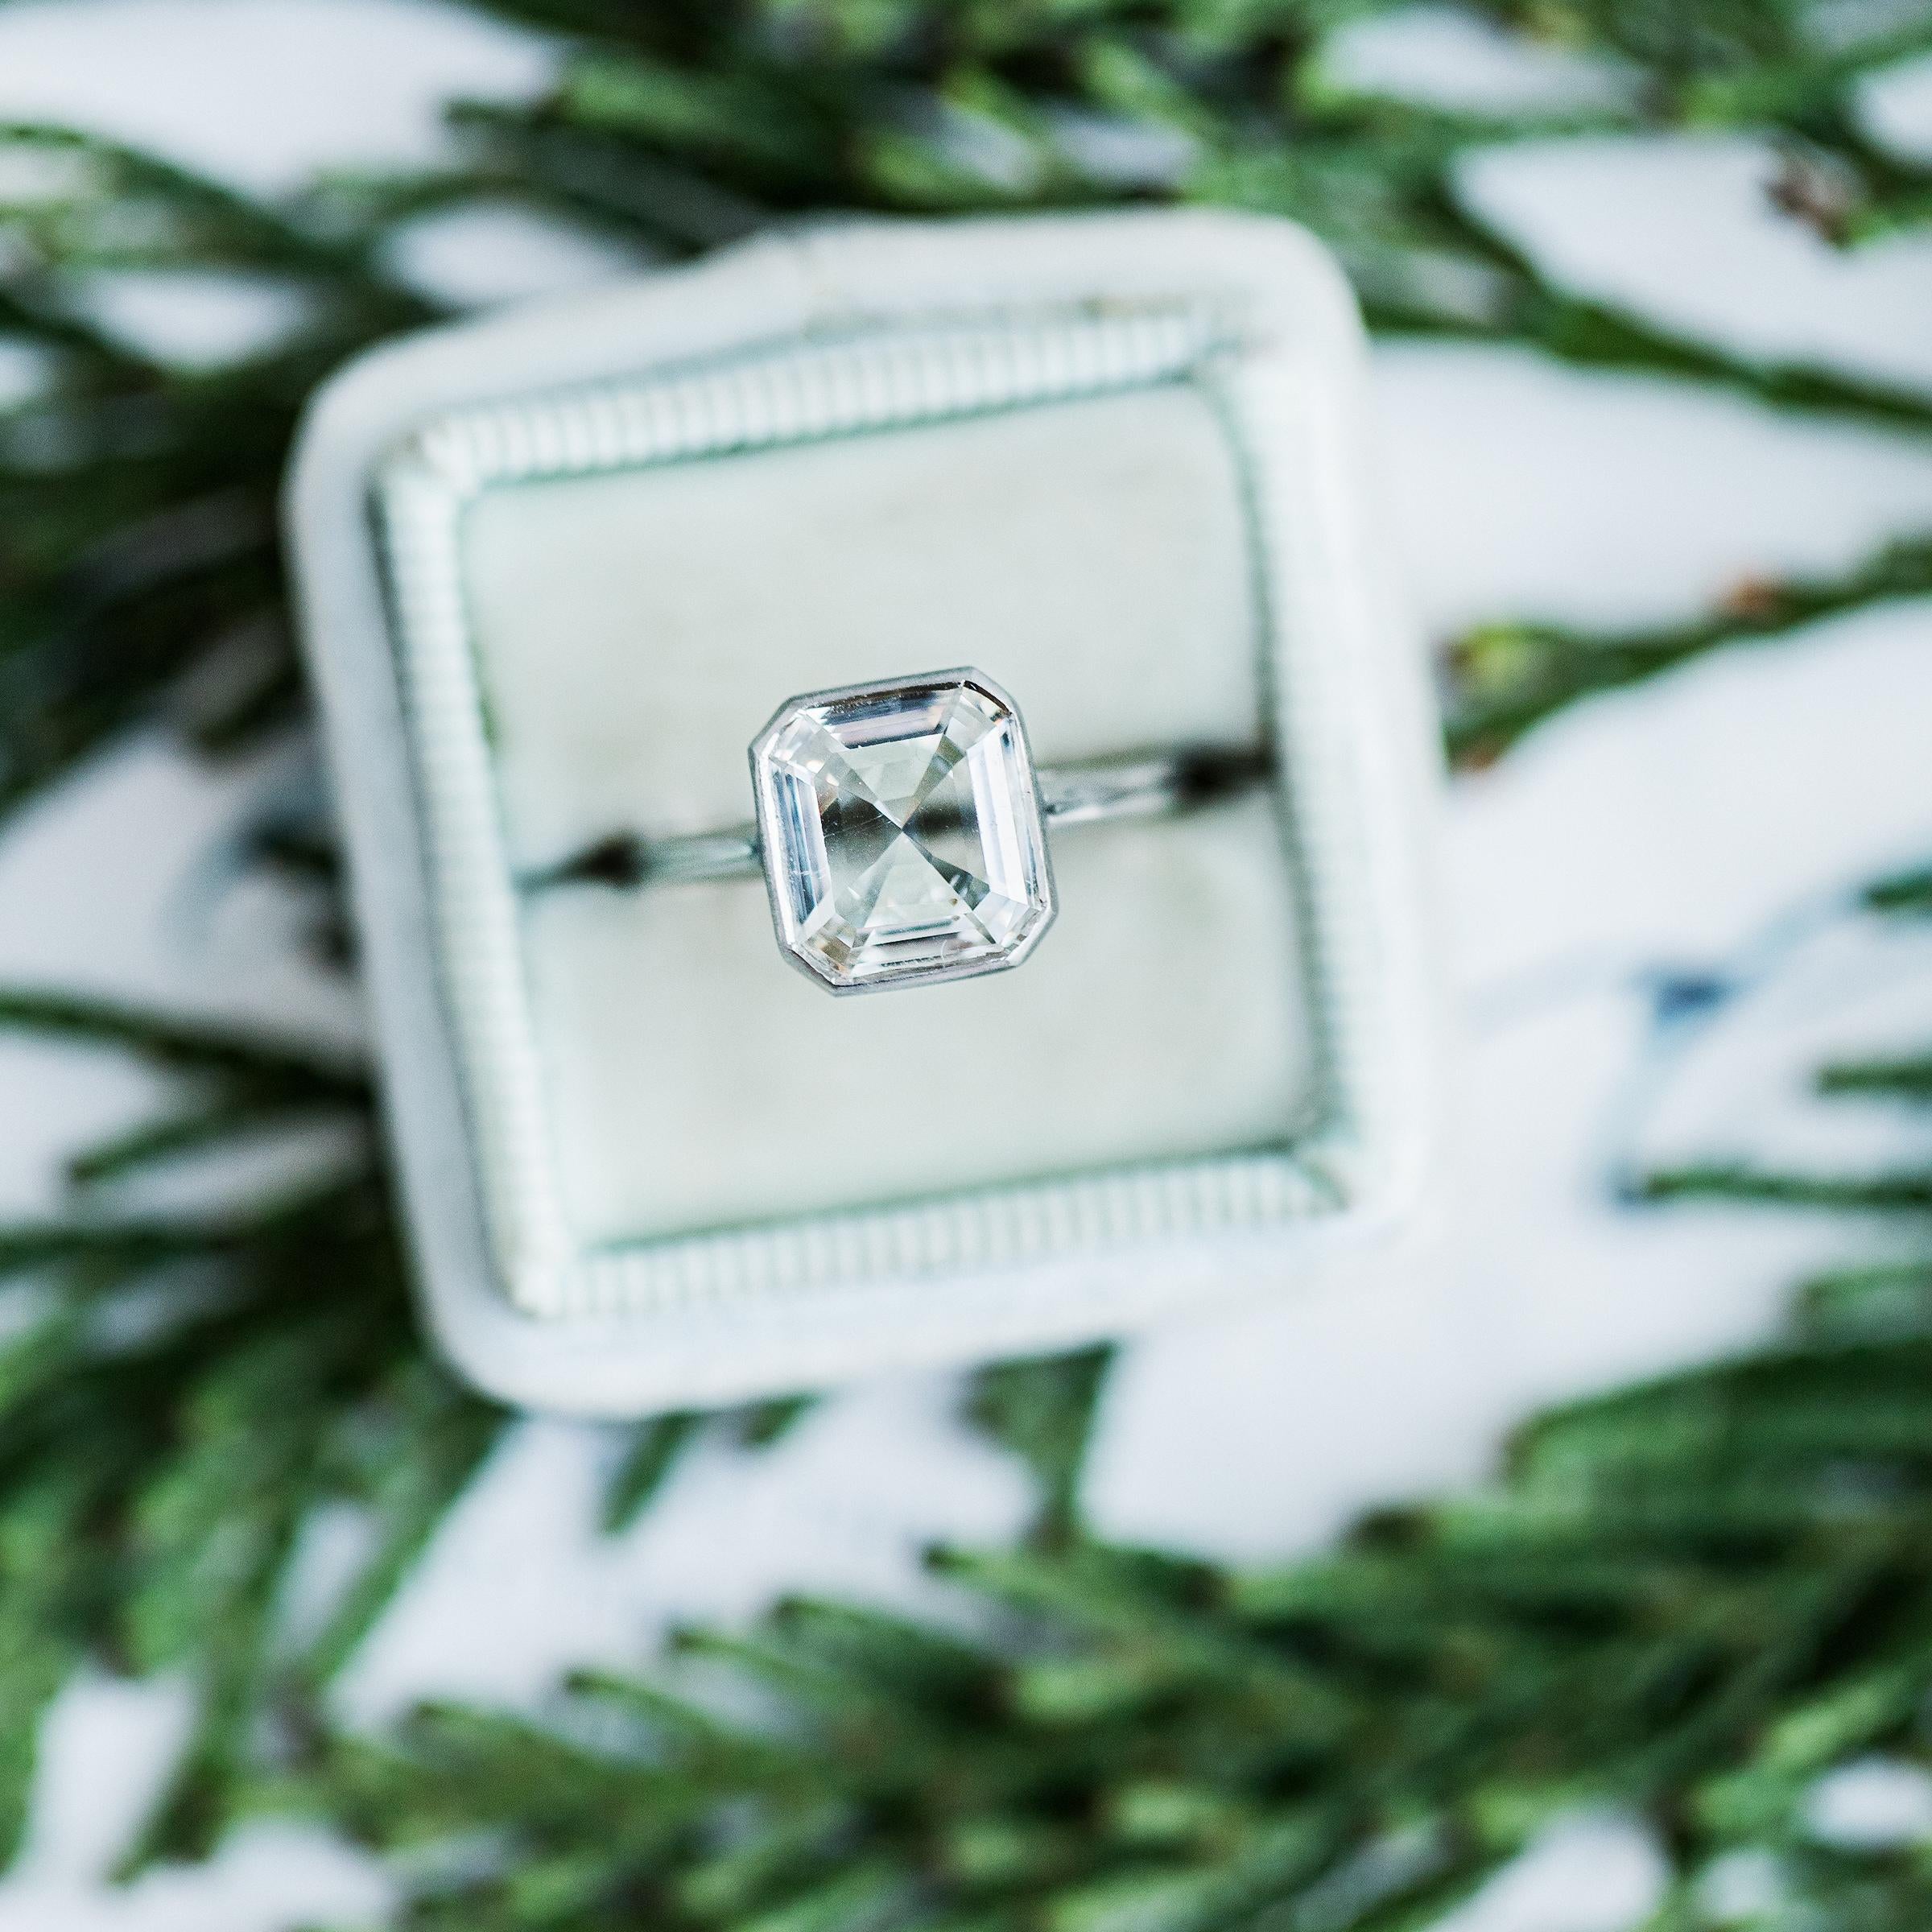 This is a wonderful modern engagement ring handcrafted in platinum by our master jeweler in downtown Los Angeles. This chic ring centers a bezel set diamond accompanied by an EGL certificate stating the 1.57ct Emerald Step Cut diamond is graded H